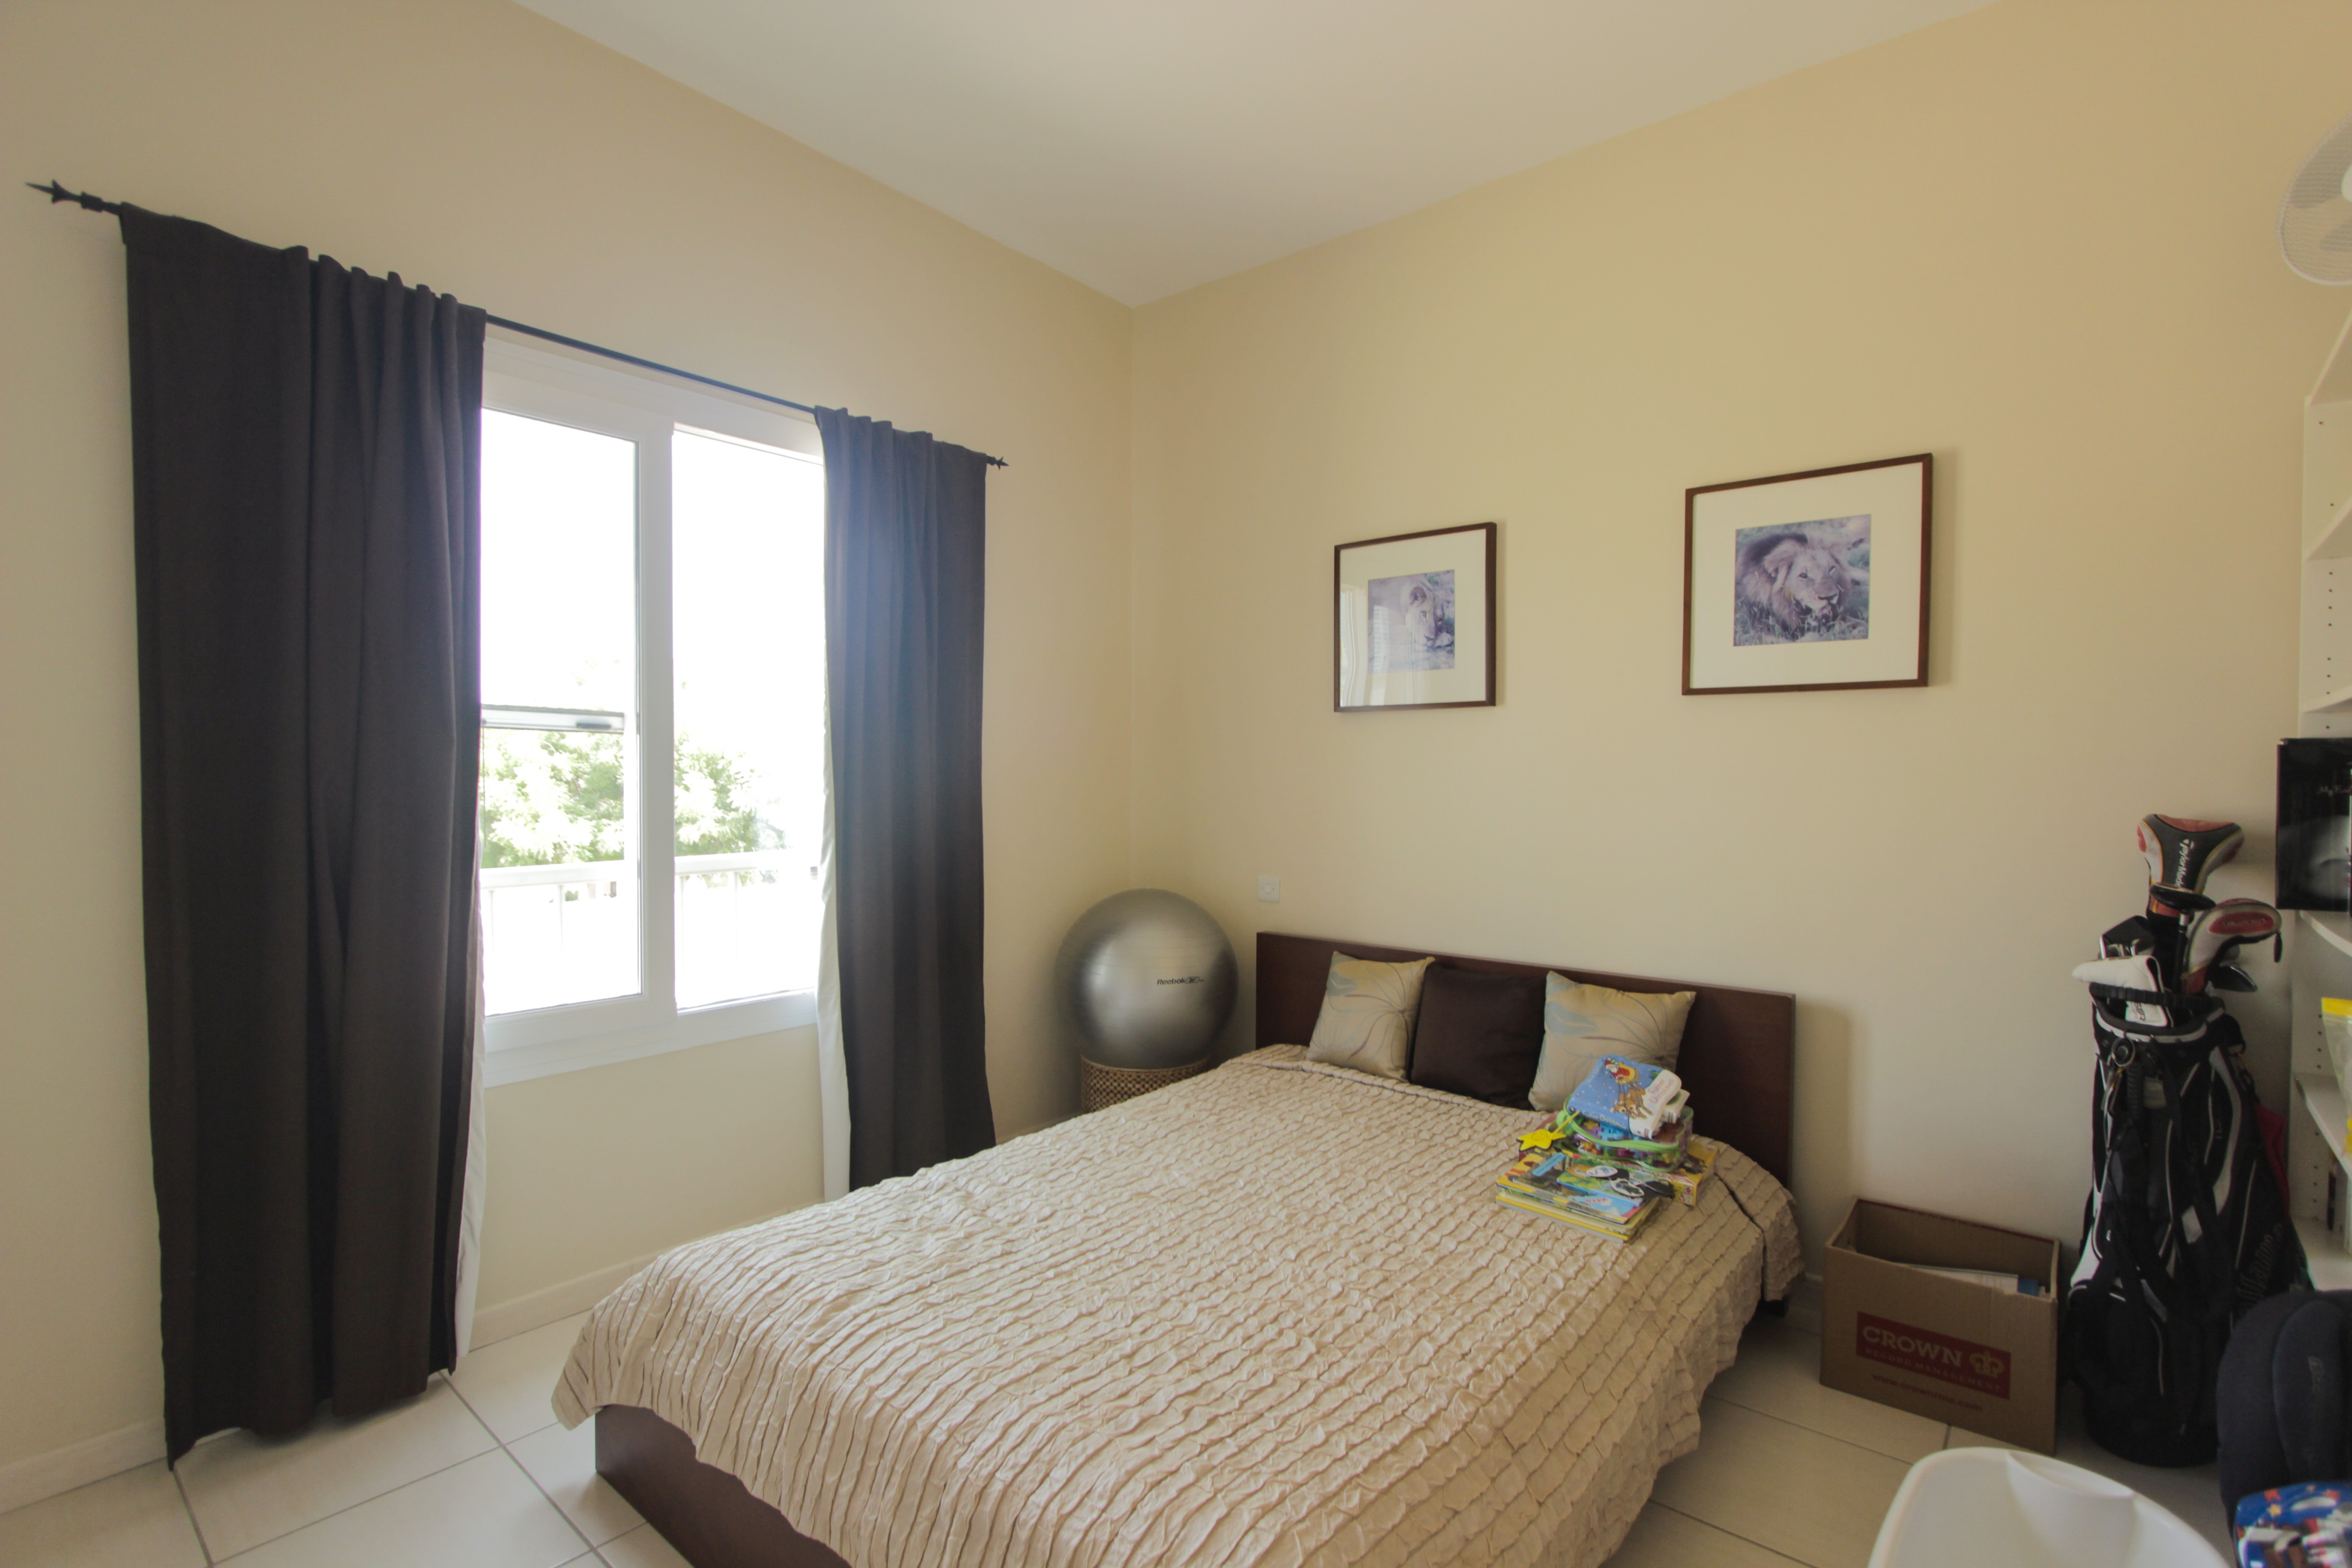 A Well Presented Three Bedroom Legacy Style Villa In A Convenient Location Er-S-3782